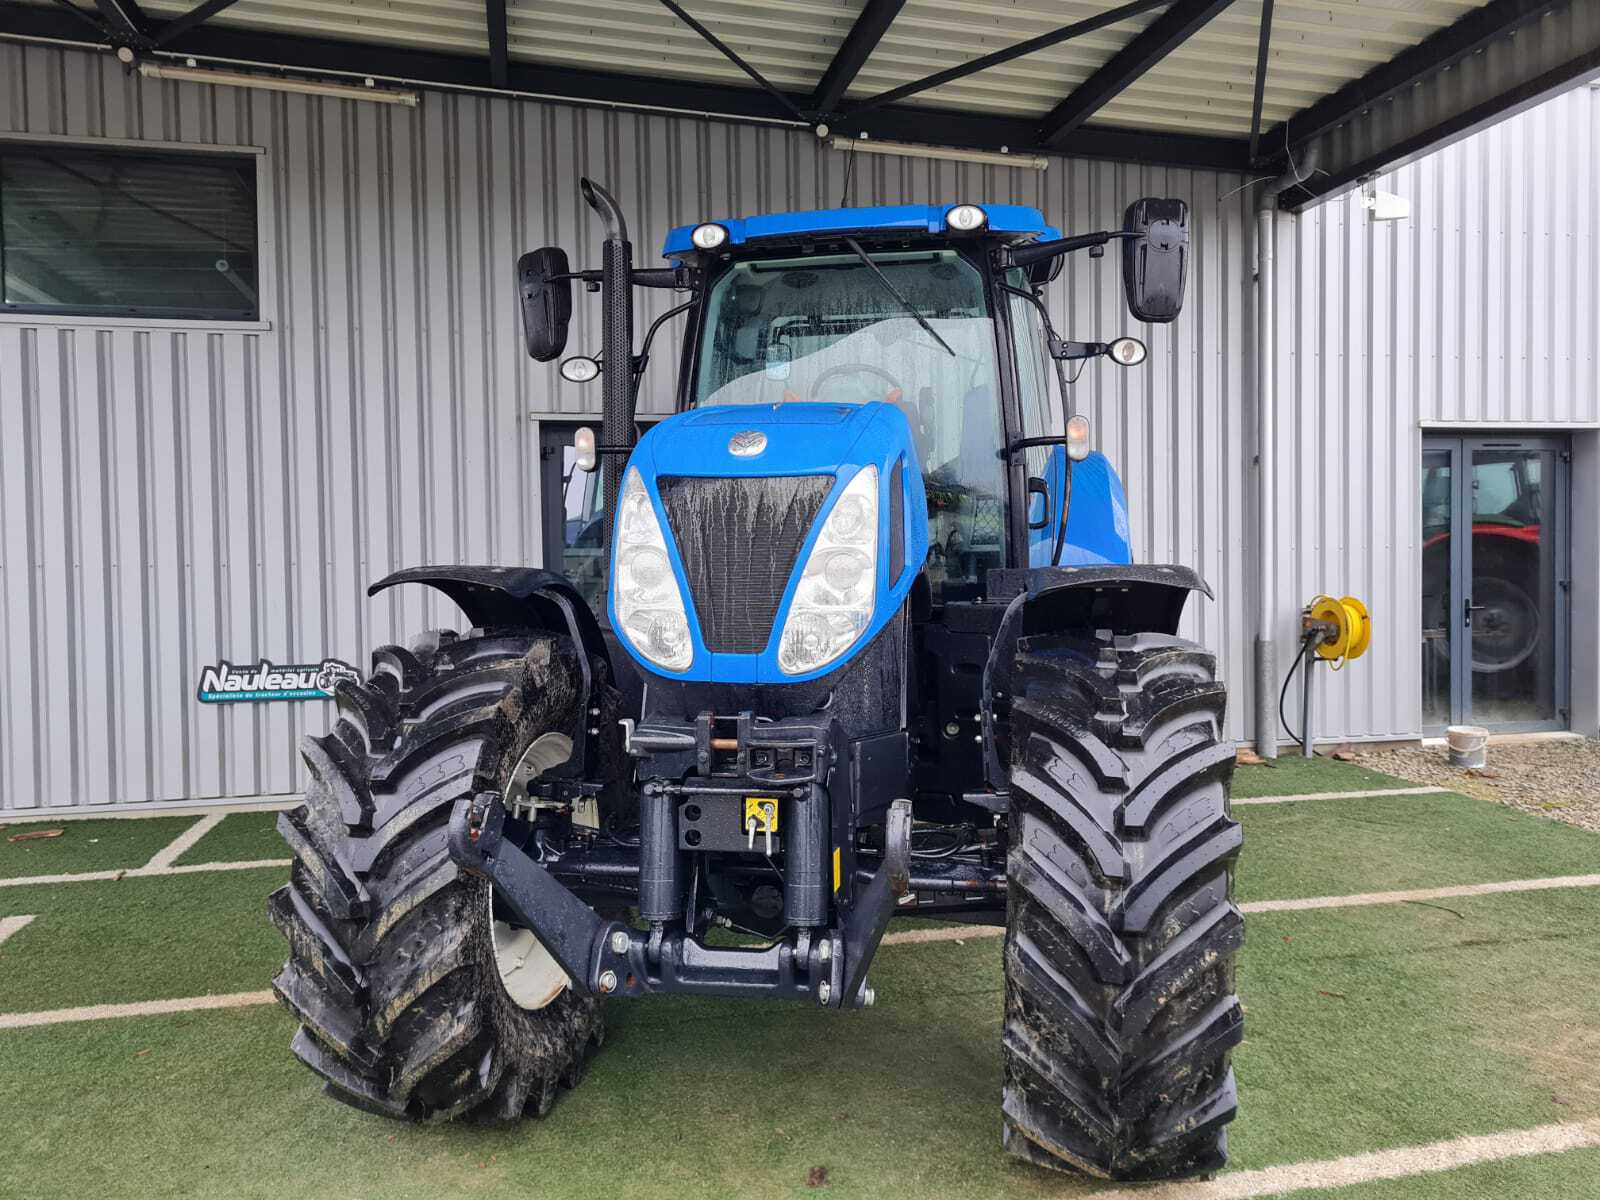 NEW HOLLAND T7.235 PC